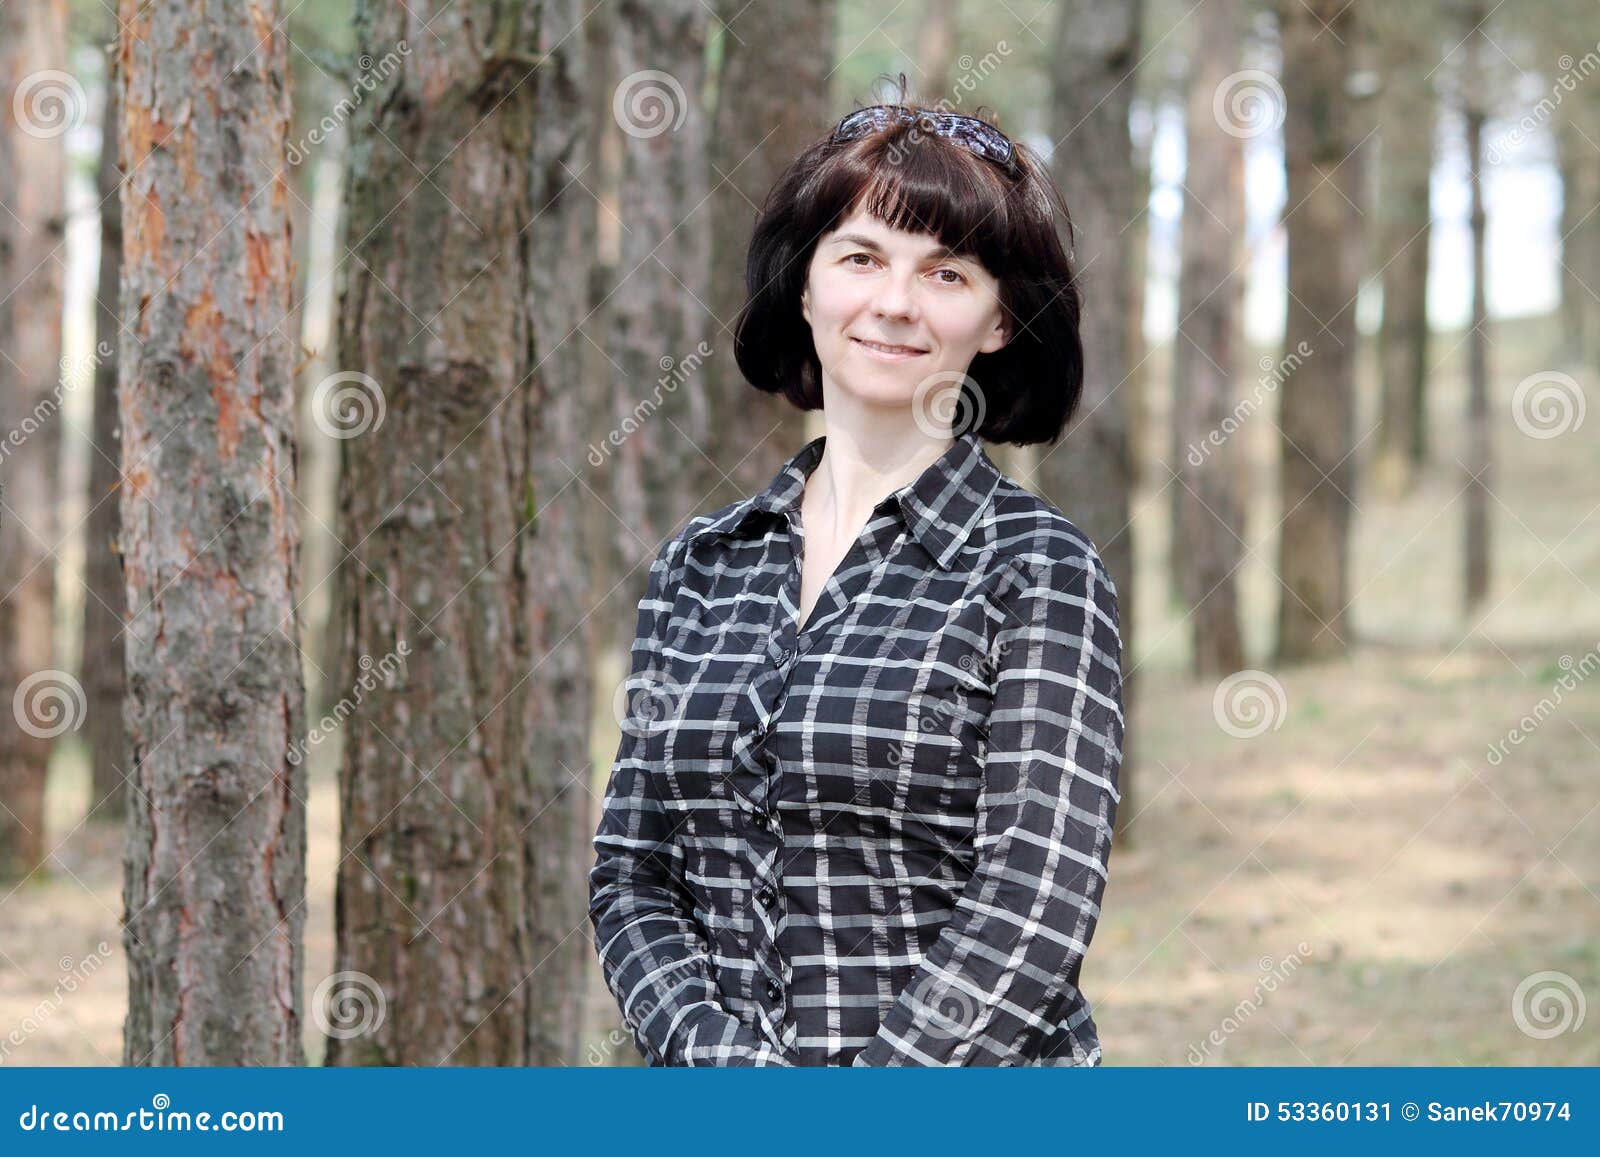 Girl in park stock image. Image of spruce, portrait, entertainment ...